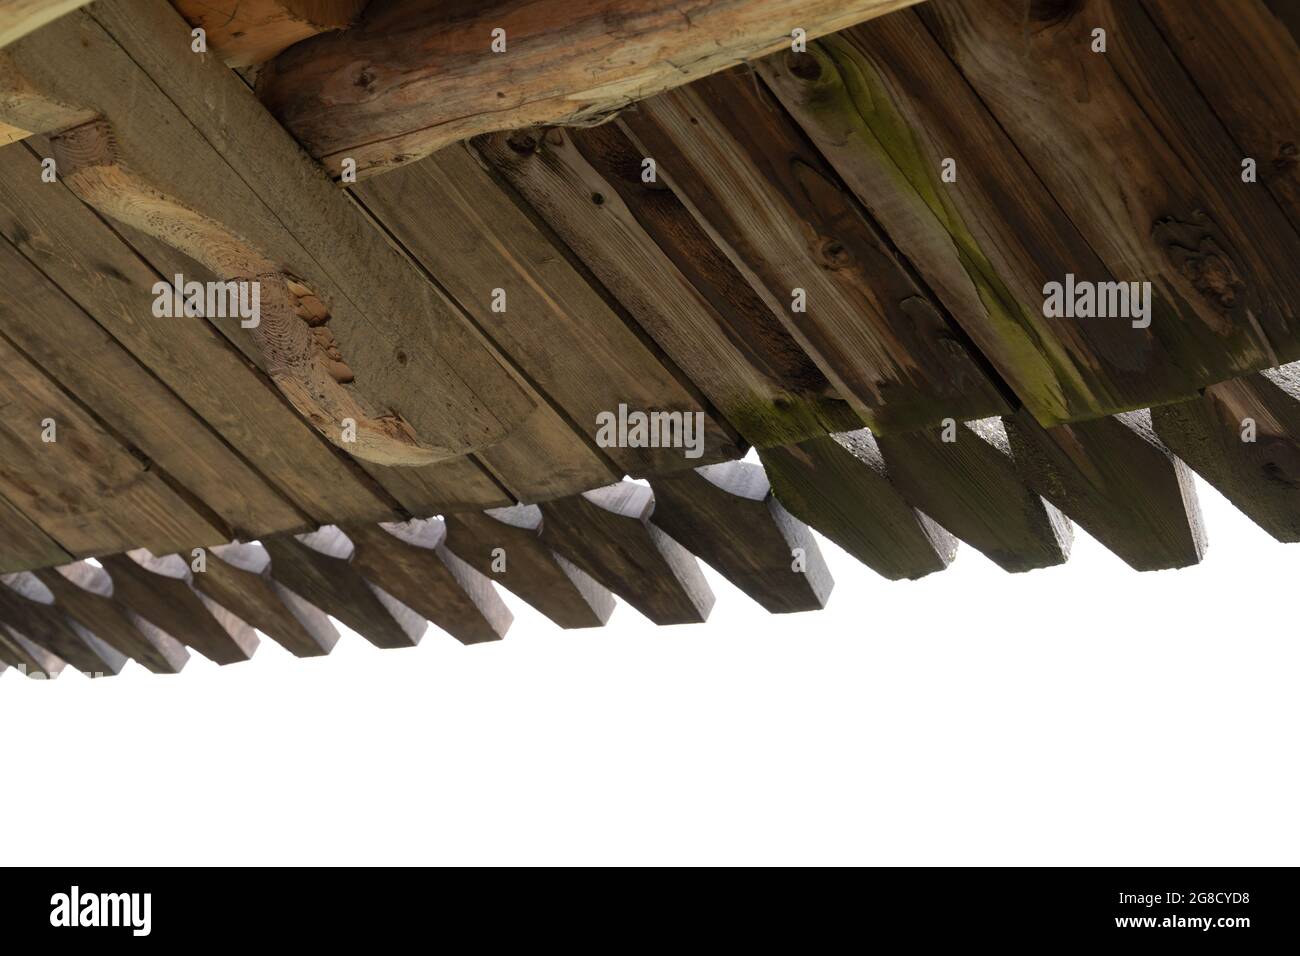 Old wooden house details. Inner side of a roof slope made of planks with decorative carving Stock Photo